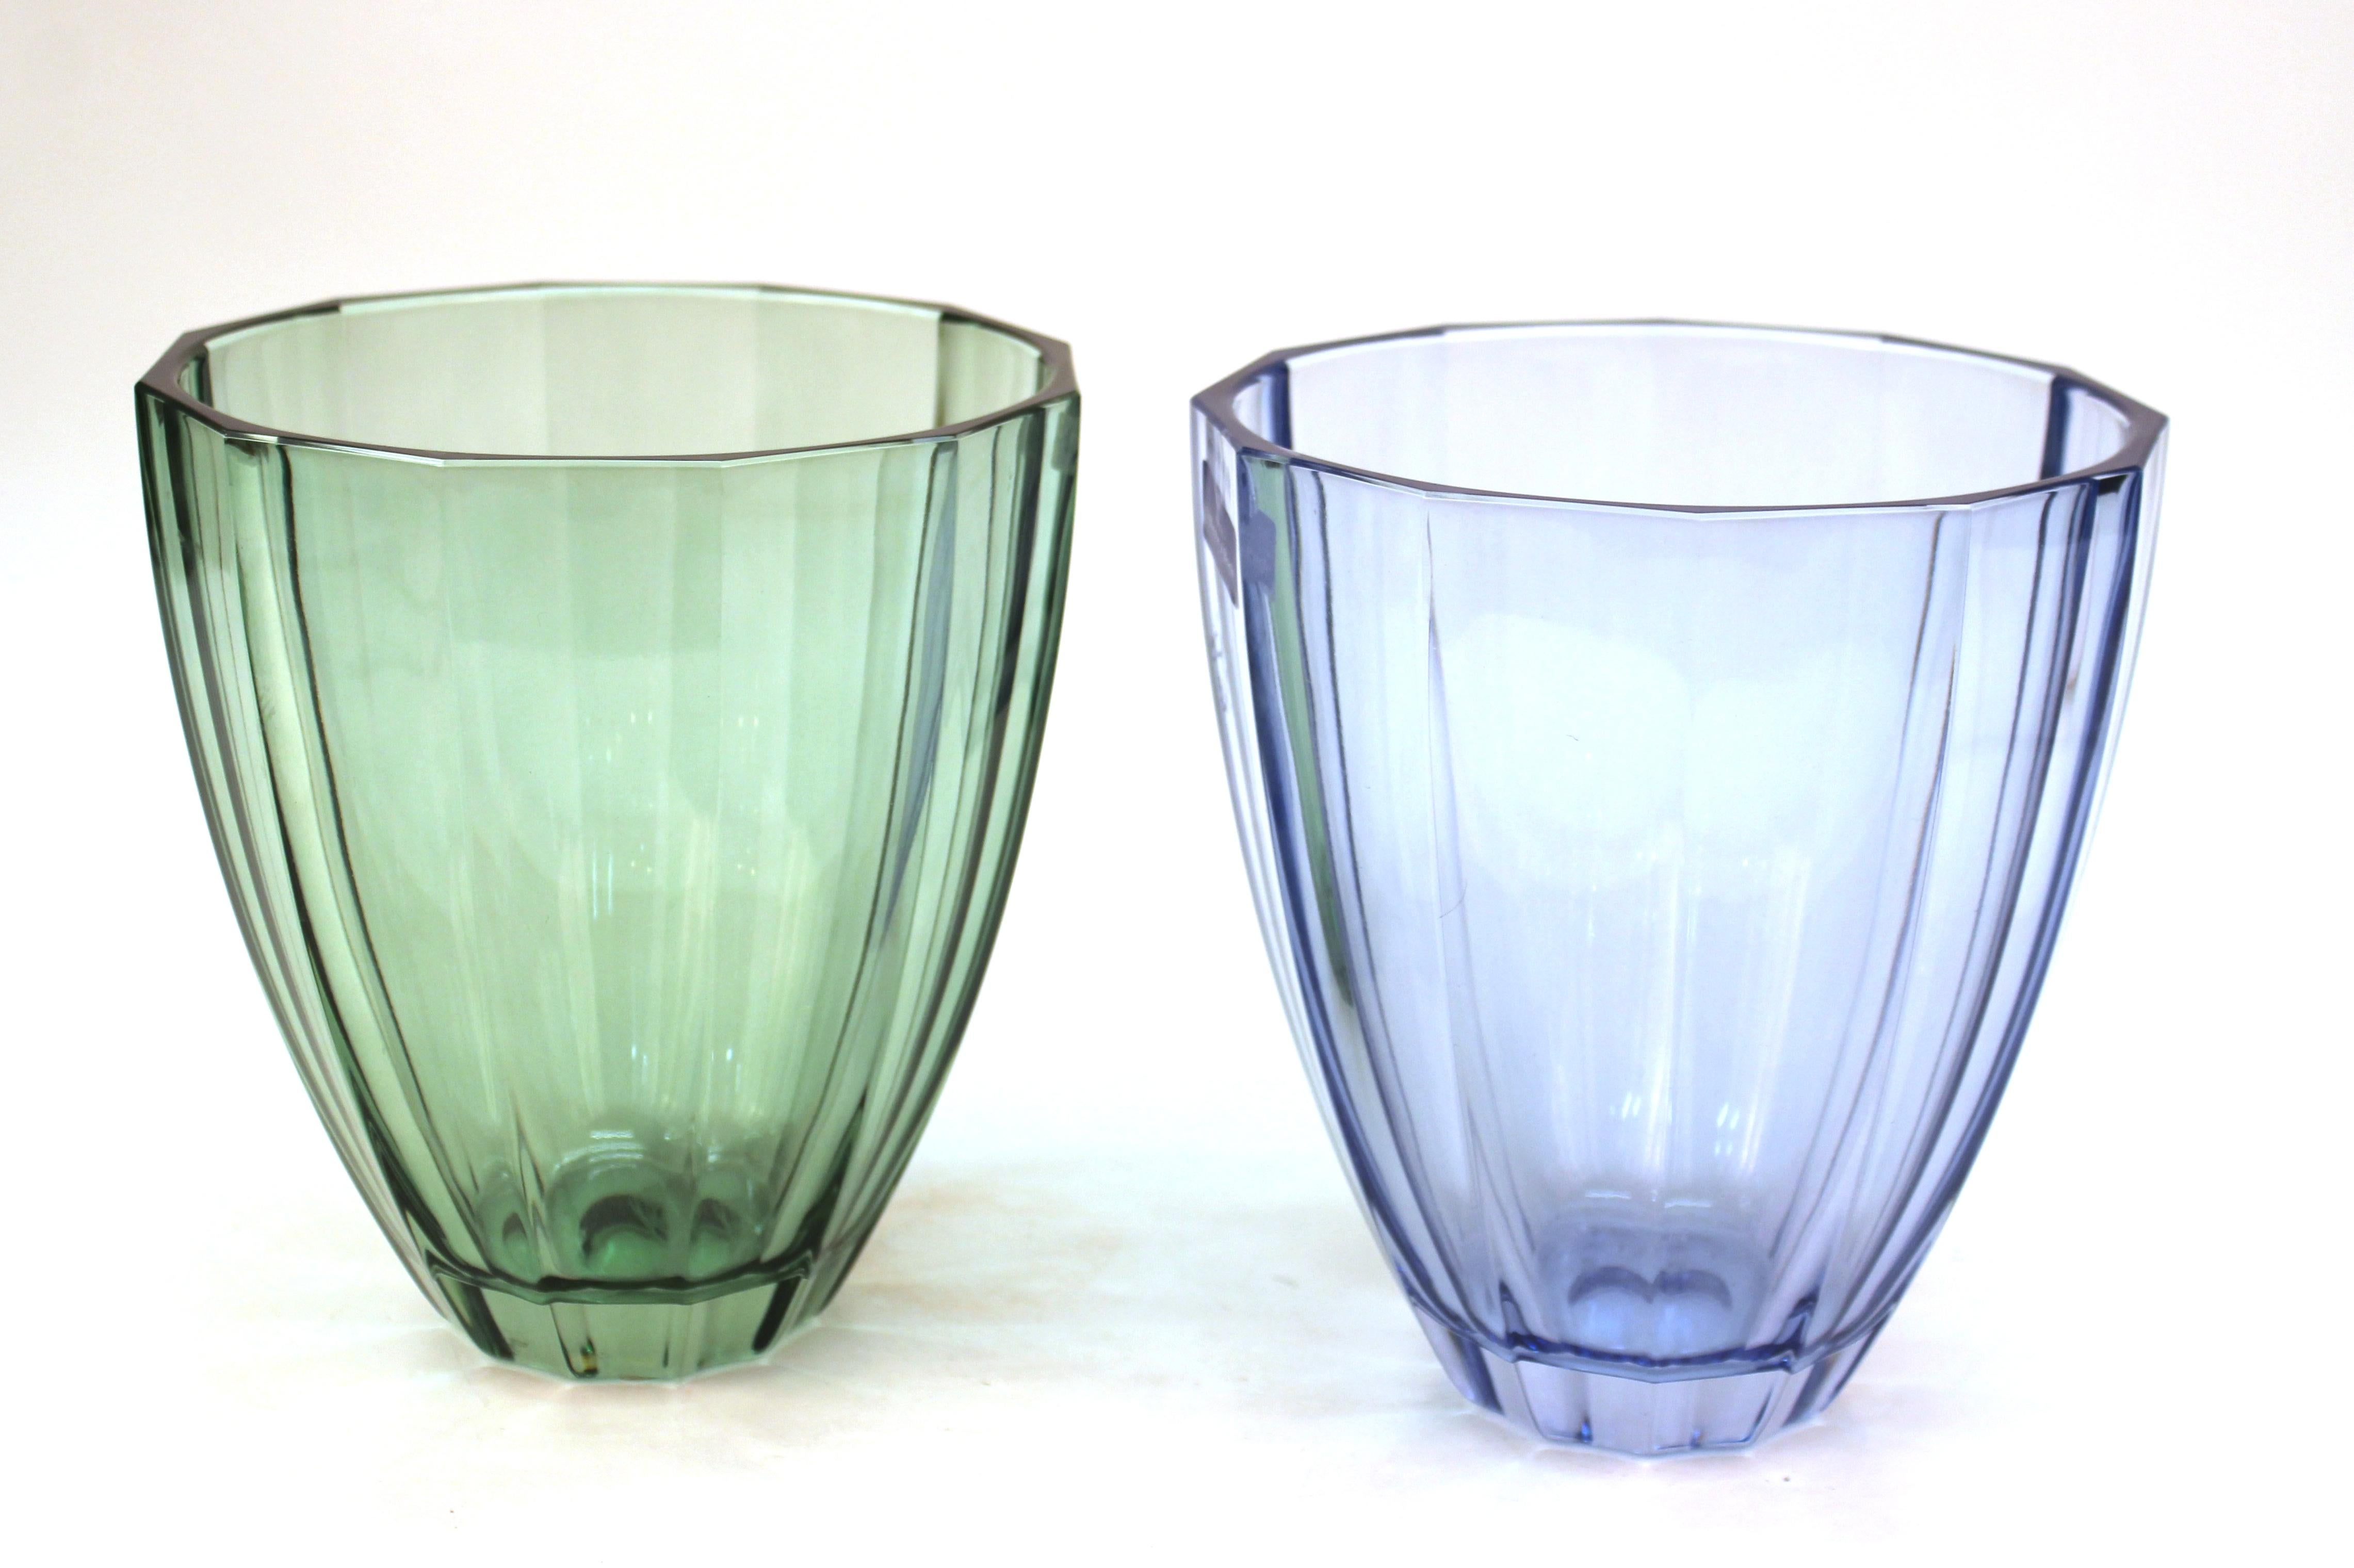 Villeroy & Boch modern style pair of decorative vases made in blue and green glass. The pair is in good condition, with age-appropriate wear to the bottoms.